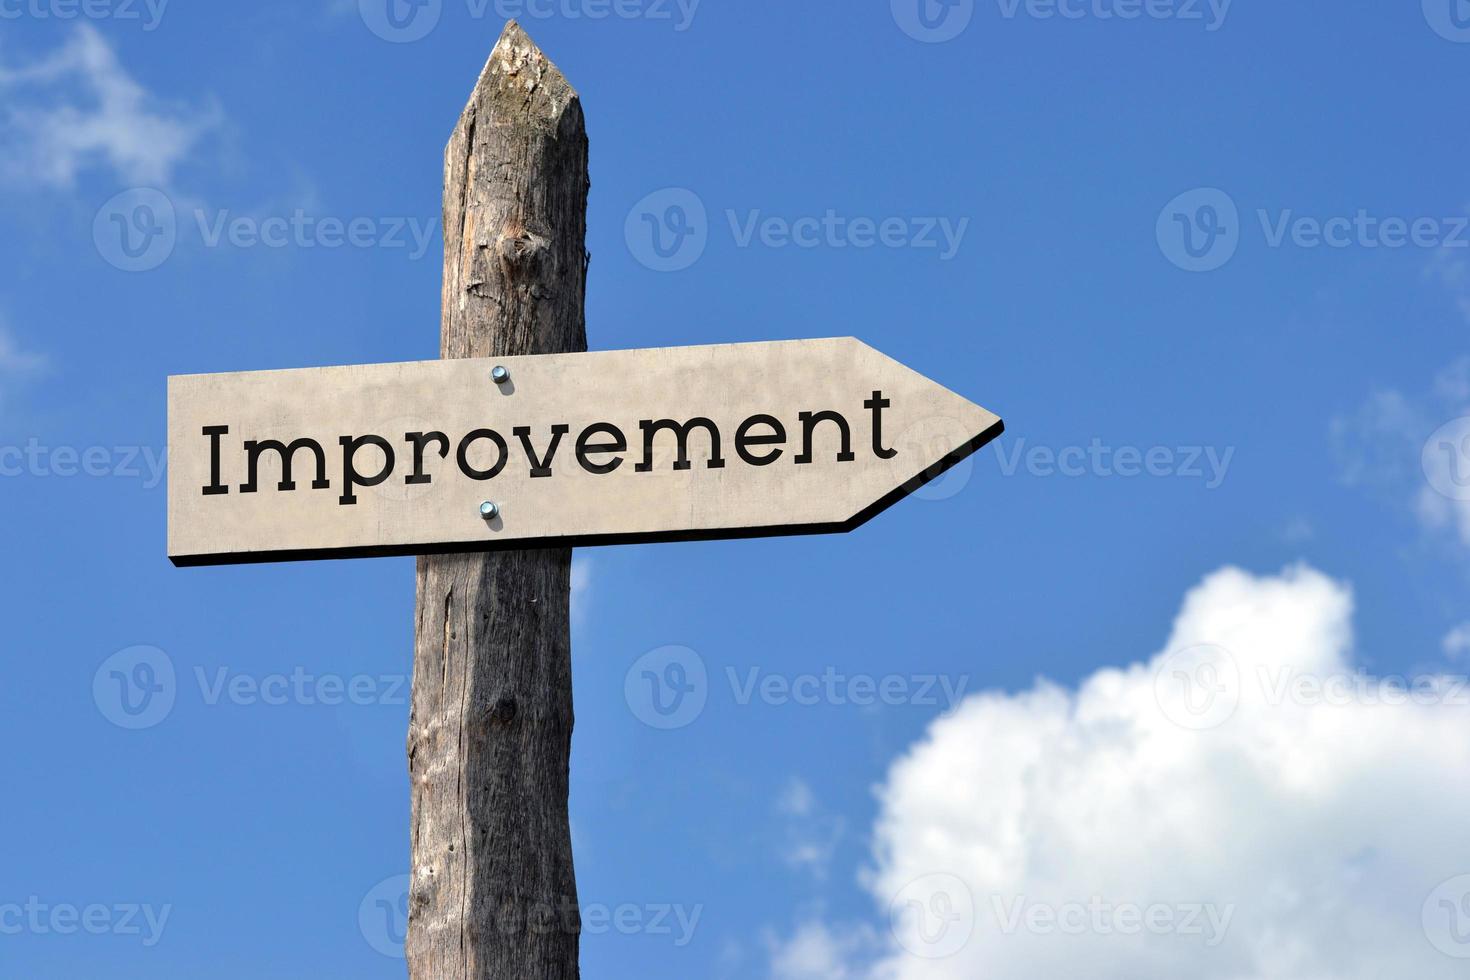 Improvement - Wooden Signpost with one Arrow, Sky with Clouds photo